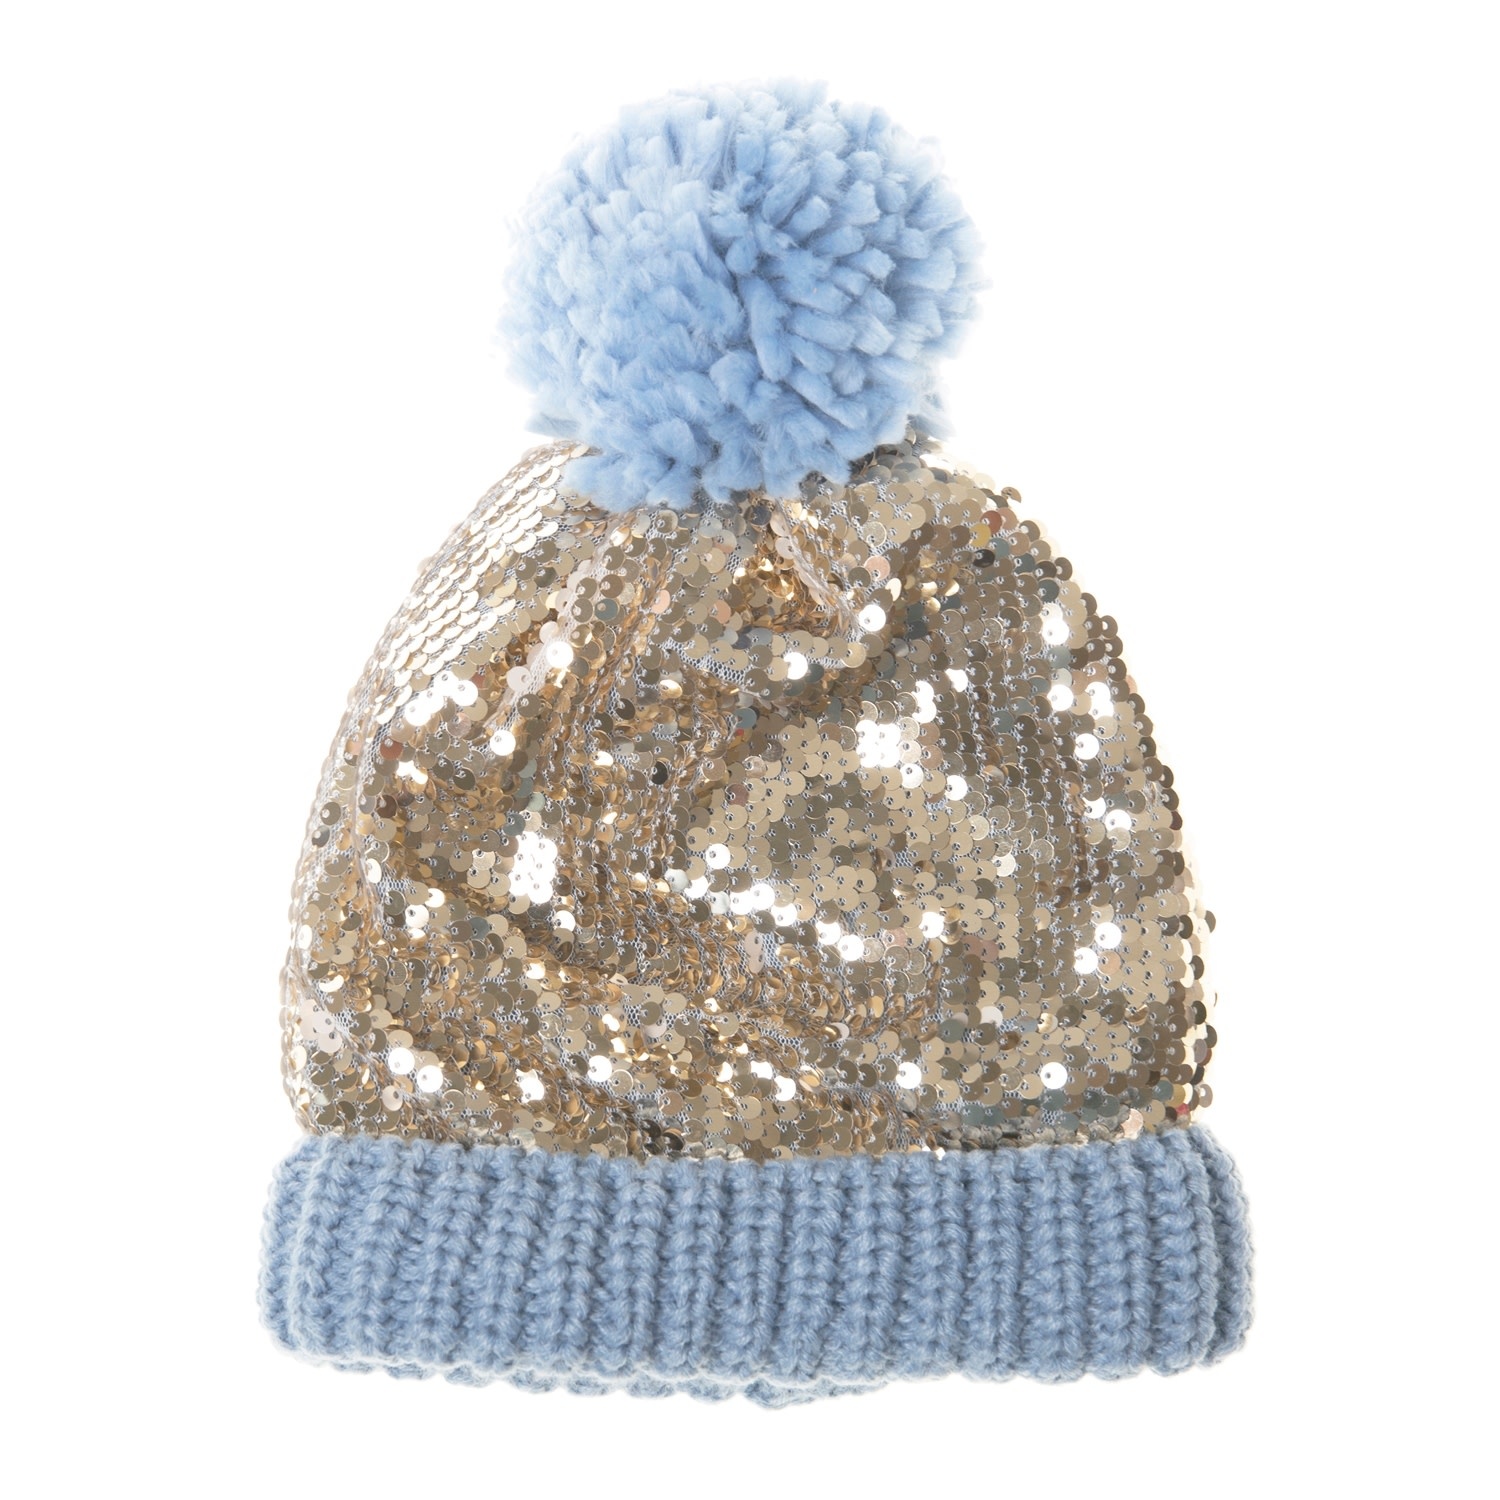 Rockahula Shimmer Sequin Knitted Hat